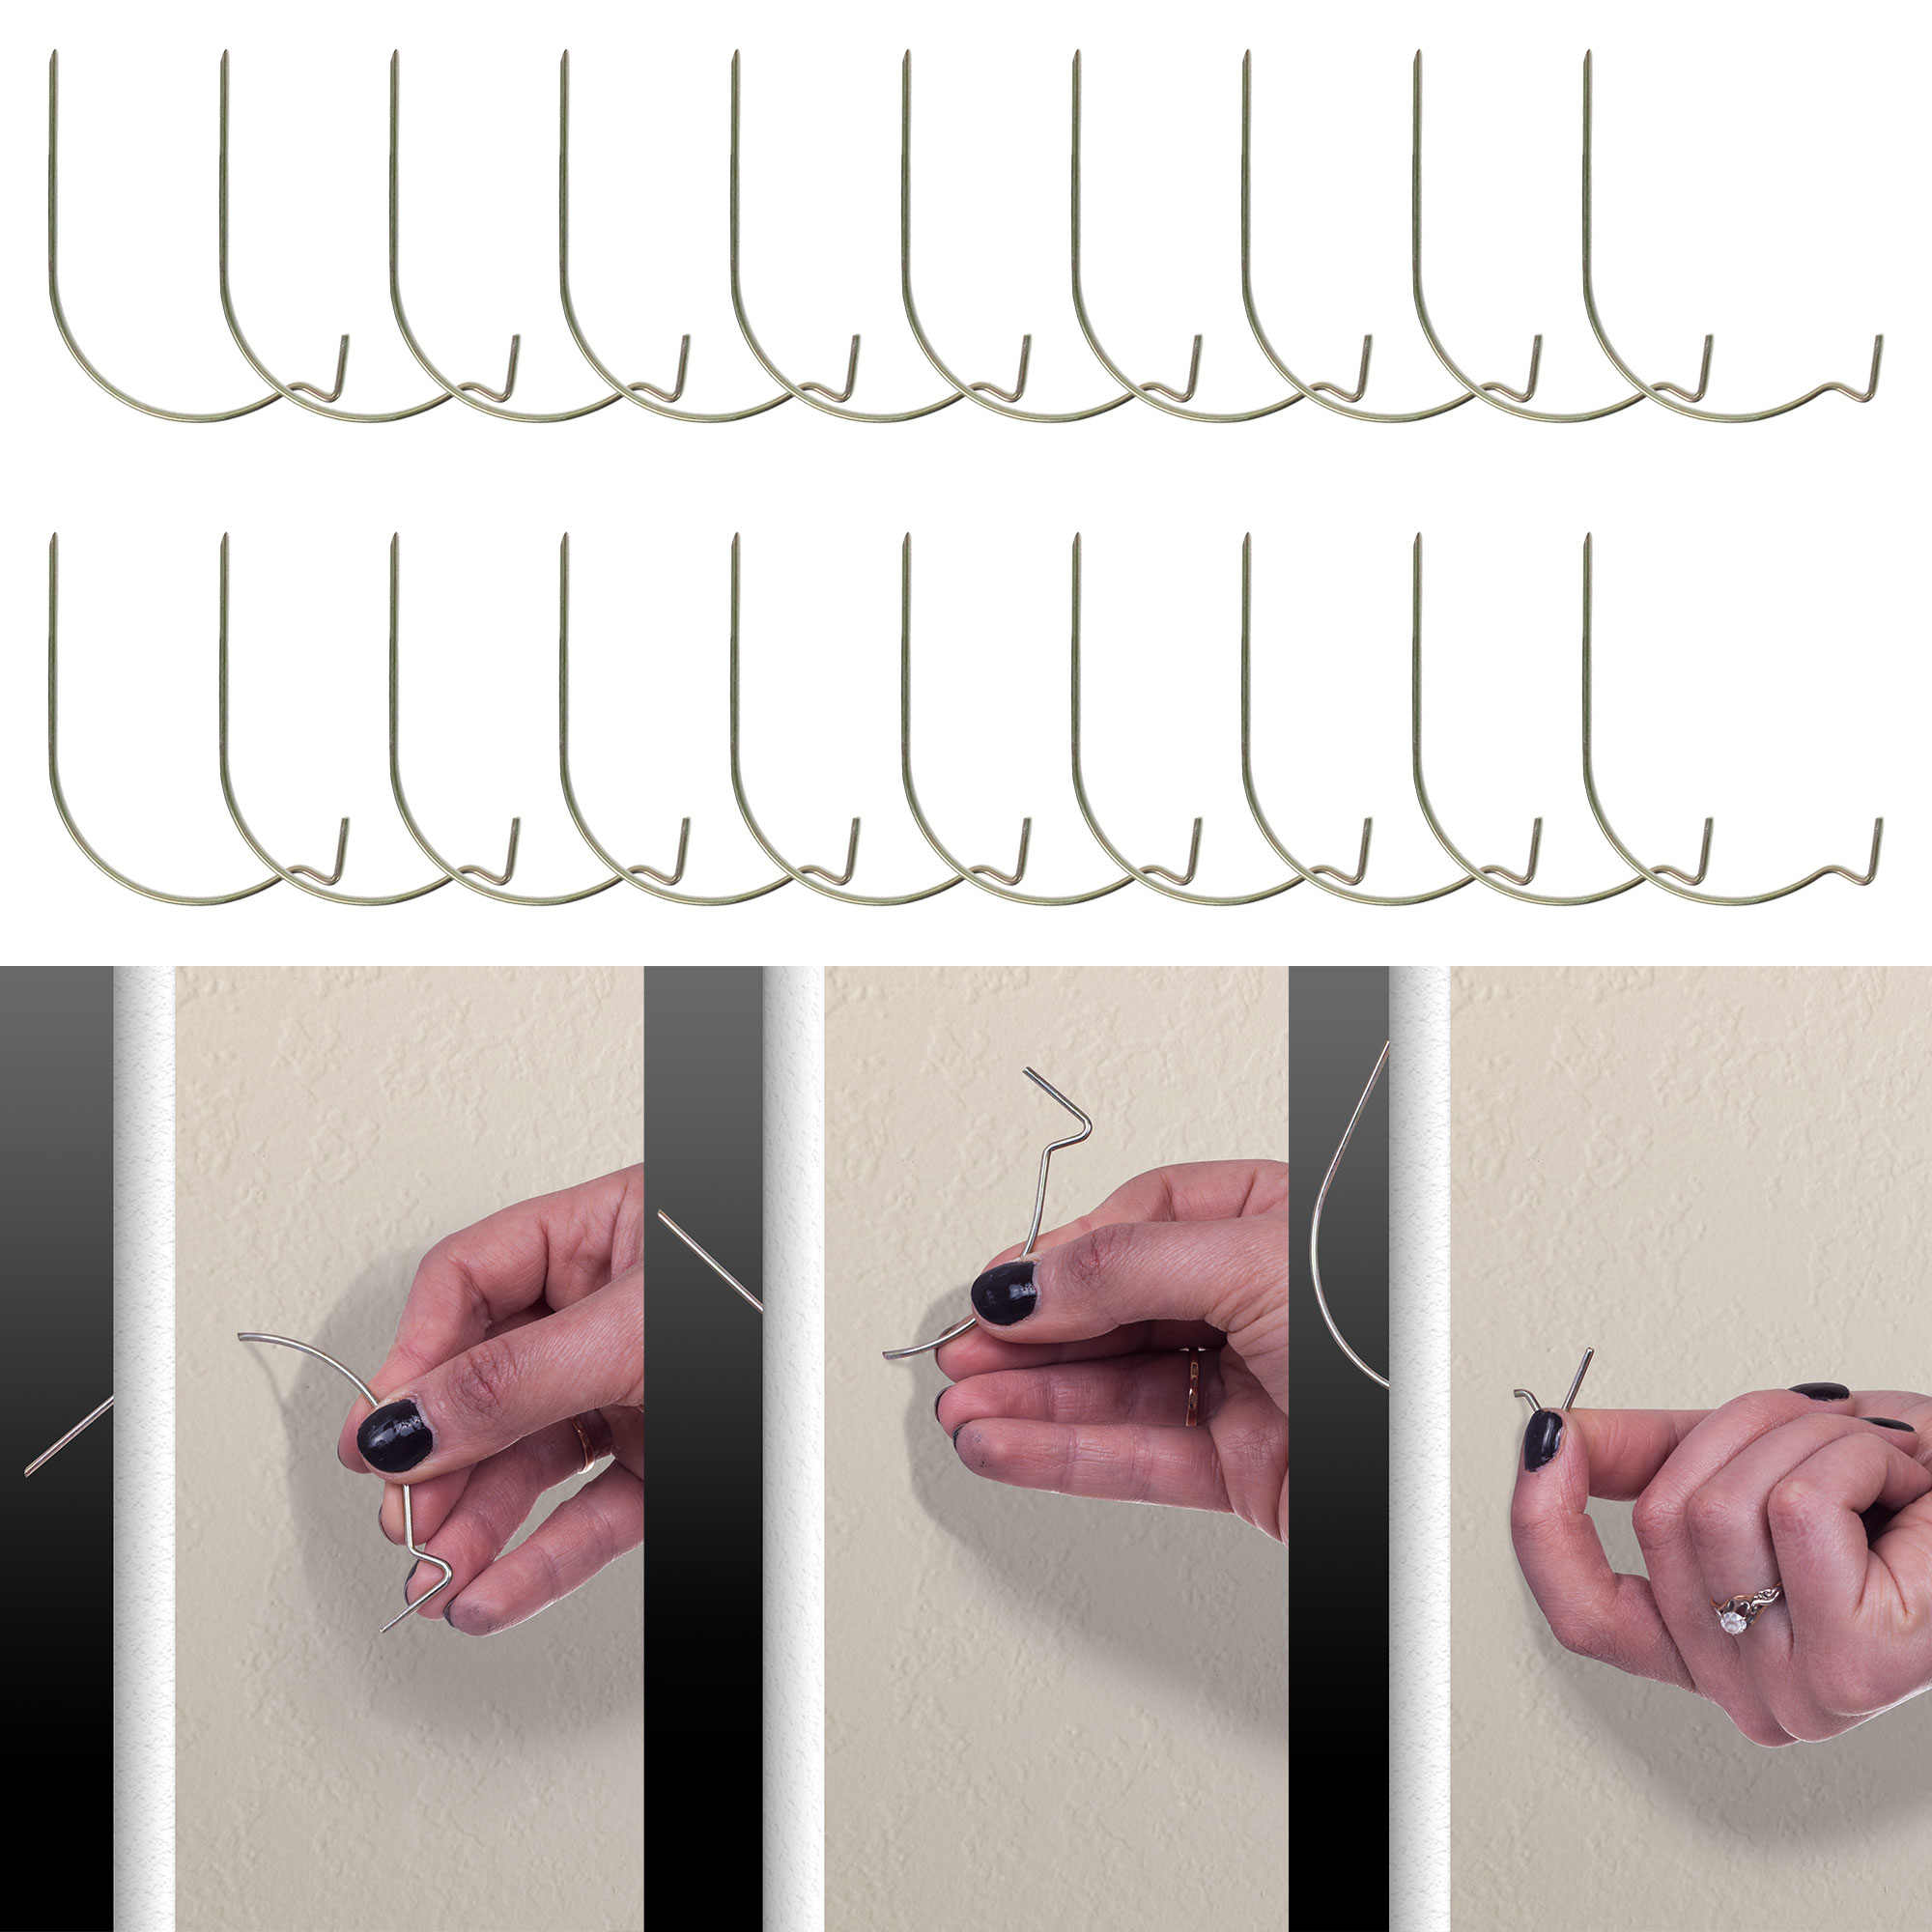 20 Super Hooks Easy Install and Hang Pictures from your Walls Hang it Up without Tools